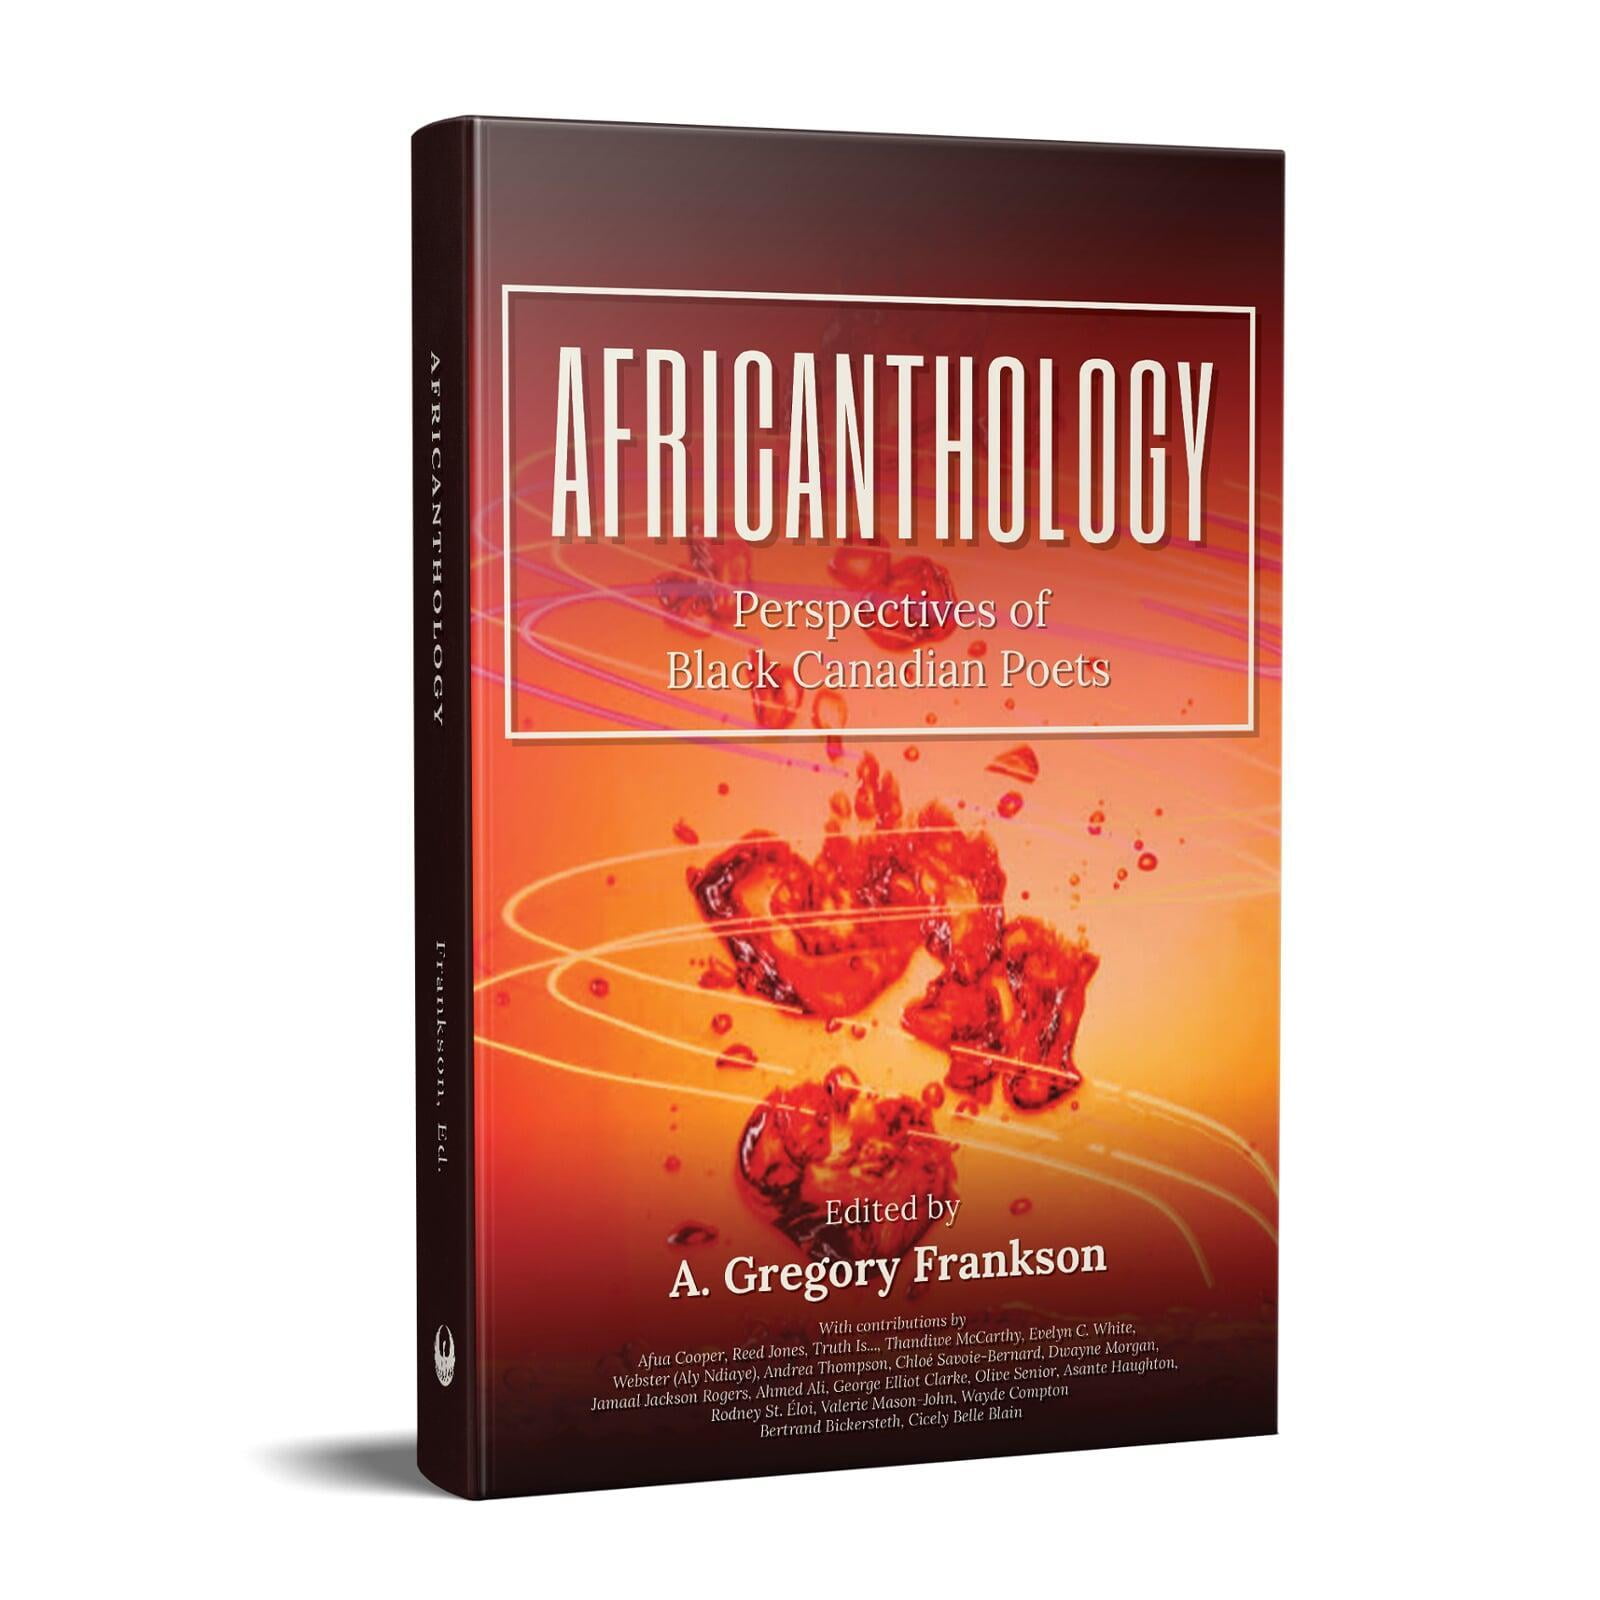 Cover design for AfriCANthology: Perspectives of Black Canadian Poets, edited by A. Gregory Frankson